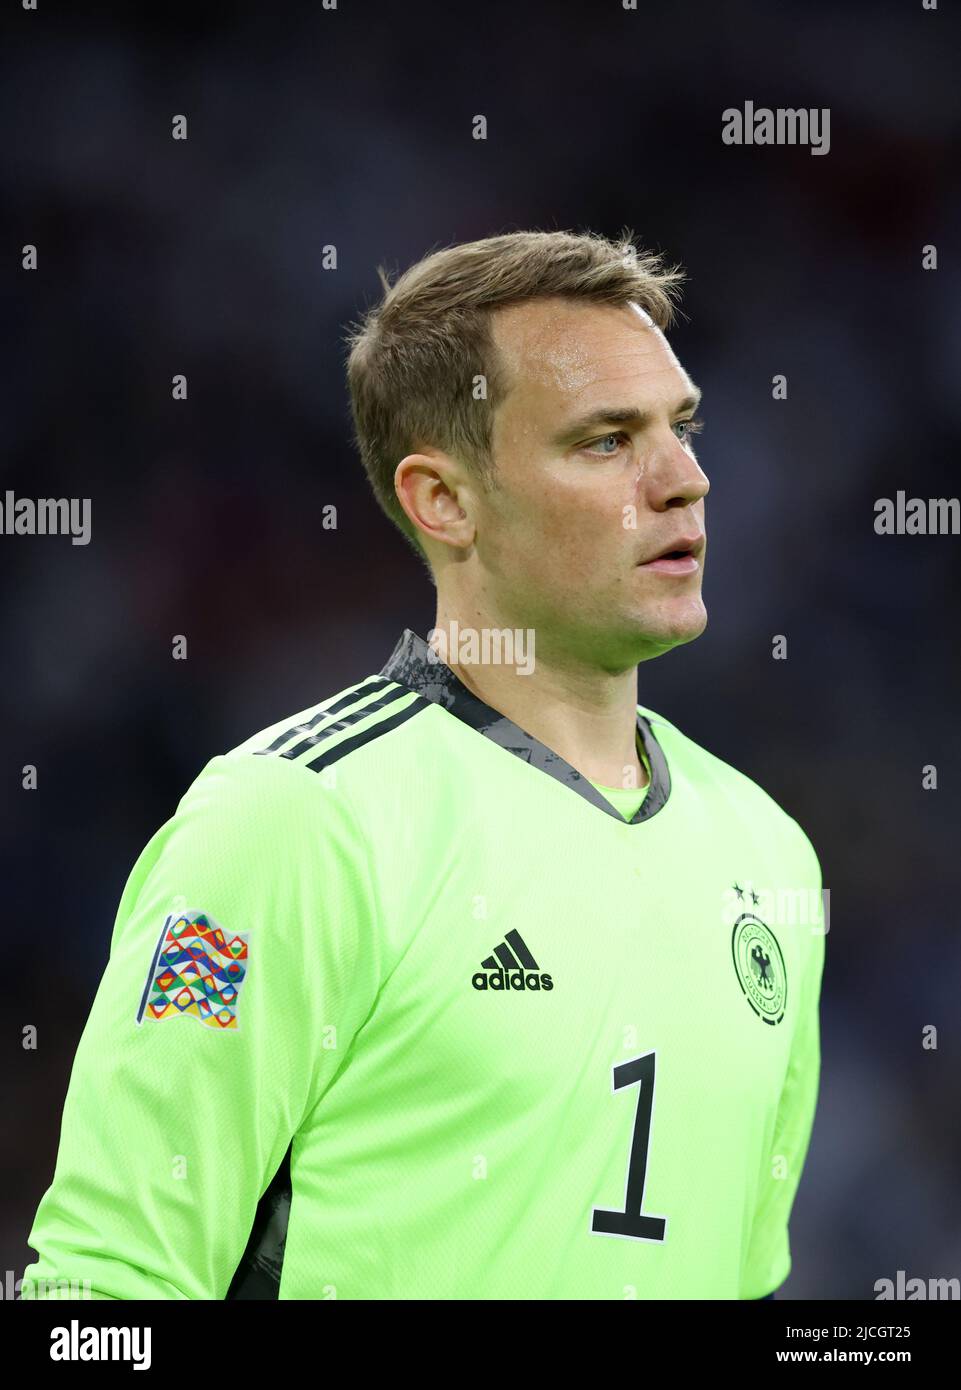 Manuel Neuer of Germany  MUNICH, GERMANY - JUNE 07:  UEFA Nations League League A Group 3 match between Germany and England at Allianz Arena on June 07, 2022 in Munich, Germany. Nations League Deutschland England  © diebilderwelt / Alamy Stock Stock Photo